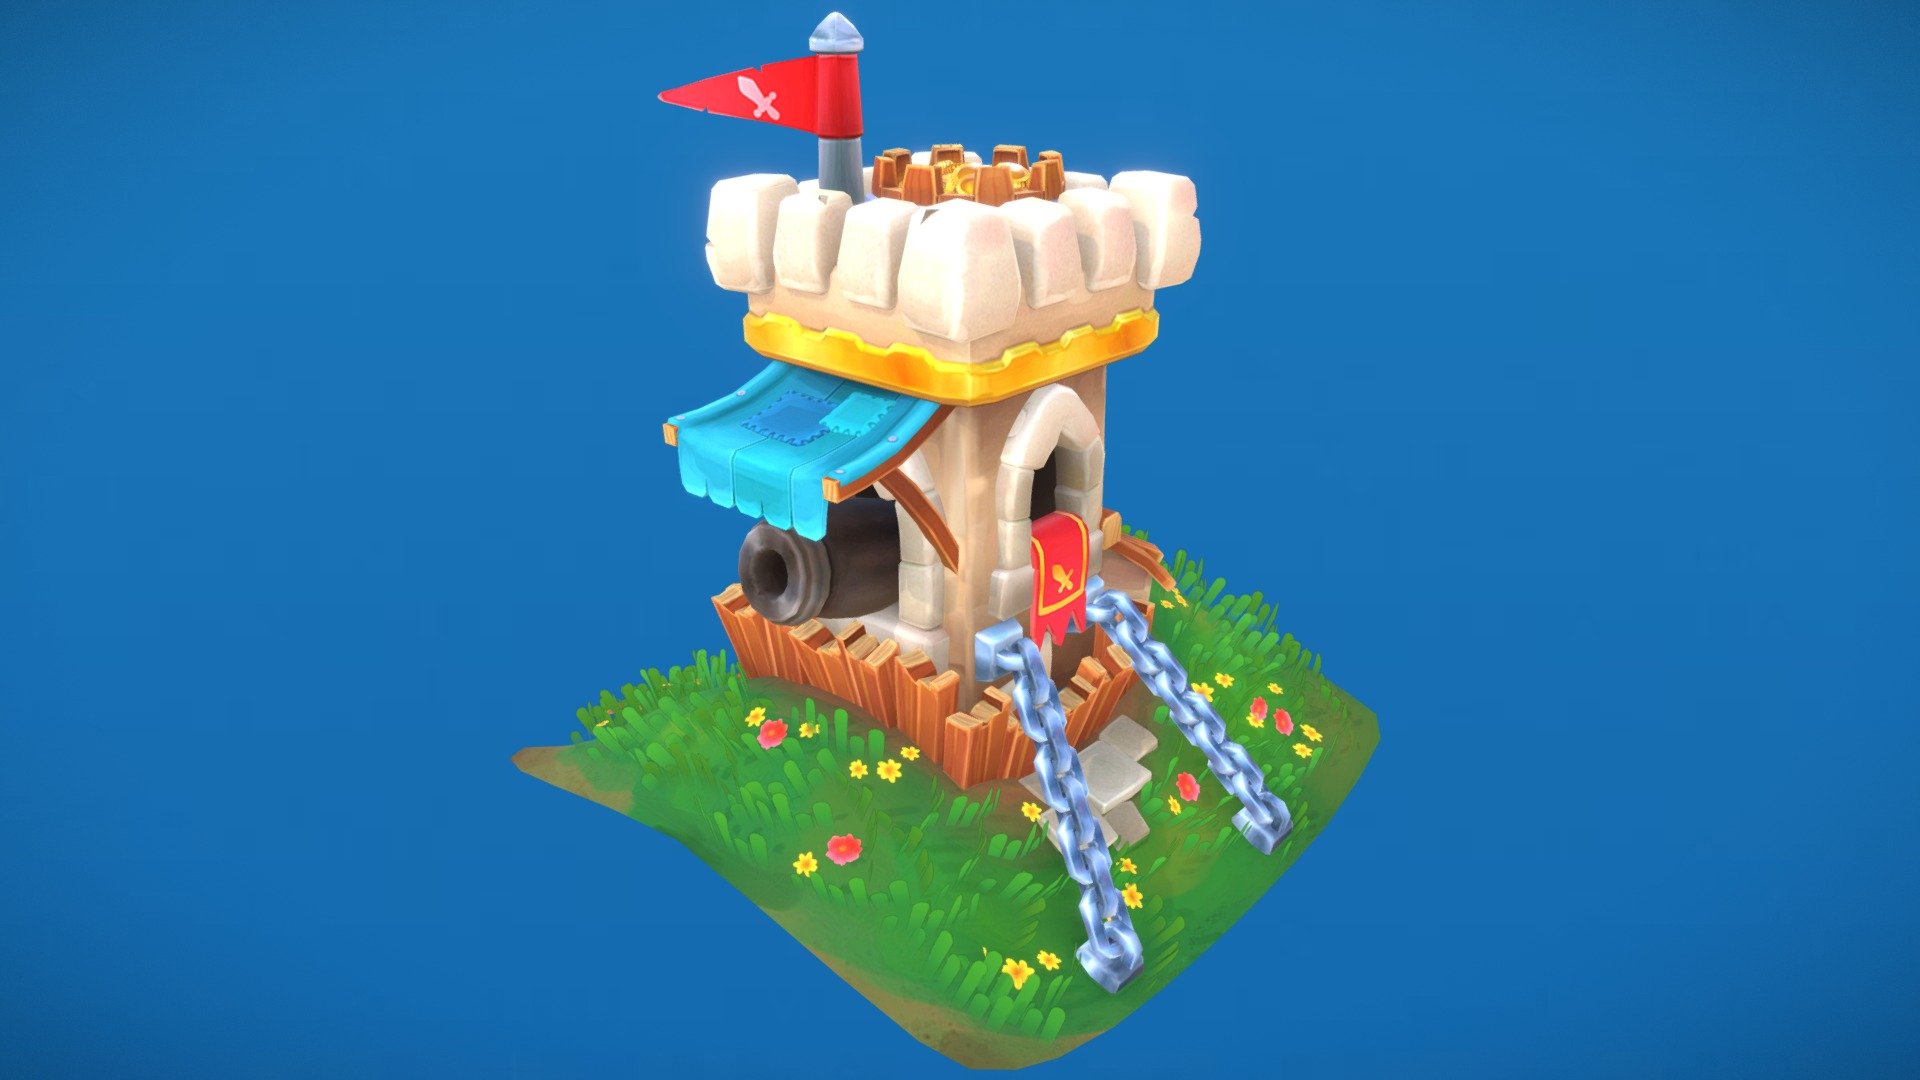 Hand painted chunky castle, loosely inspired by Supercell / Clash.
10k mesh, a 1k and a 512 map 3d model